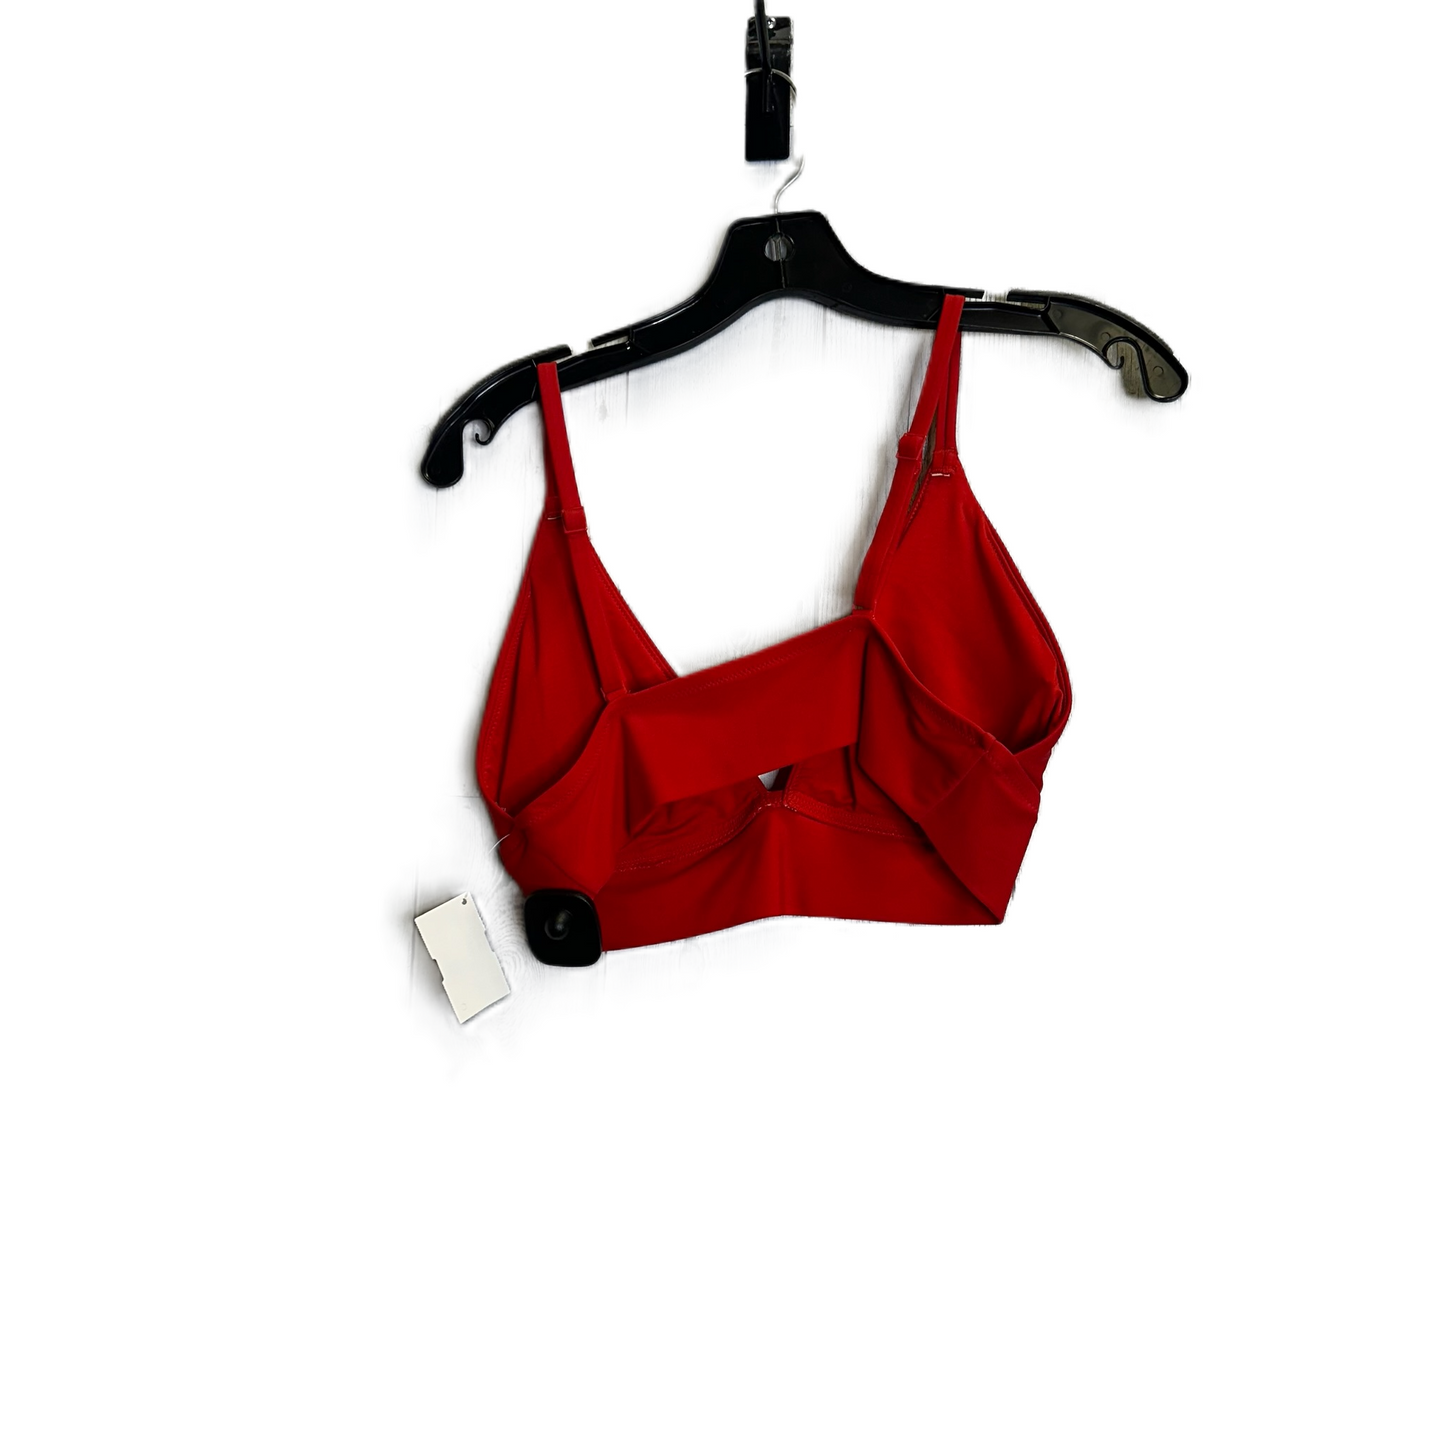 Red Swimsuit Top By Aerie, Size: L